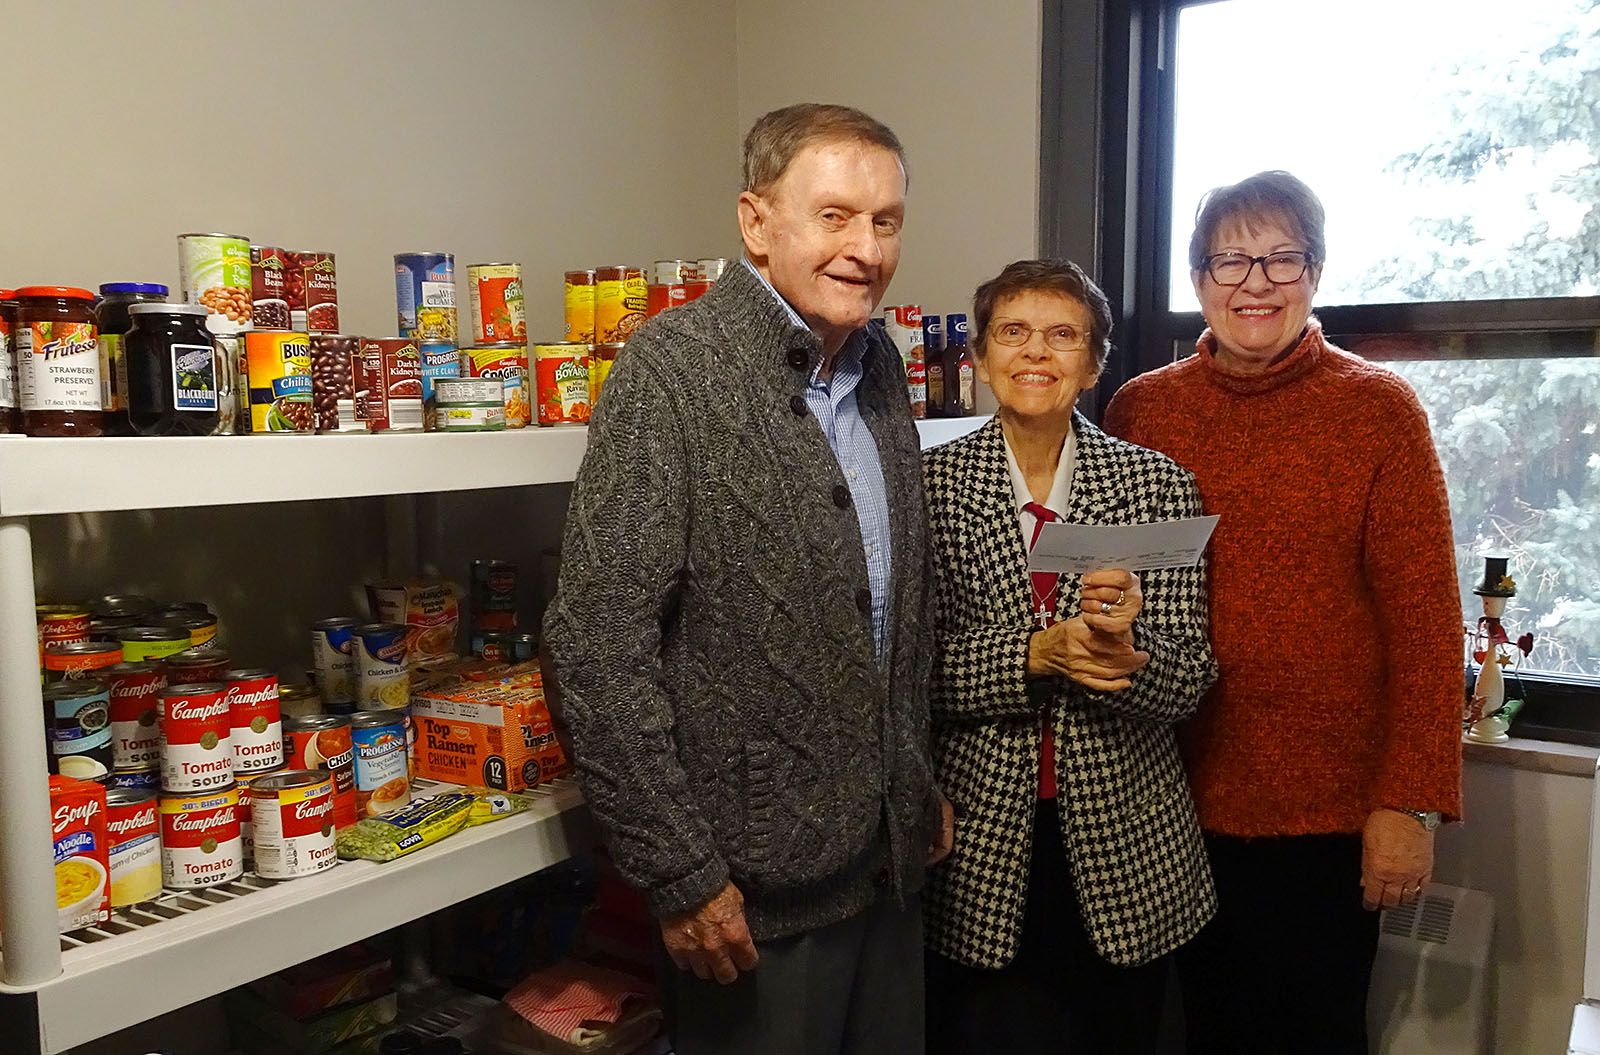 Sister Marie Andre Main, center, poses with HOPE Committee members Frank and Christine O'Connor in Trocaire's student food pantry, Catherine's Cupboard. (Courtesy of Trocaire College)